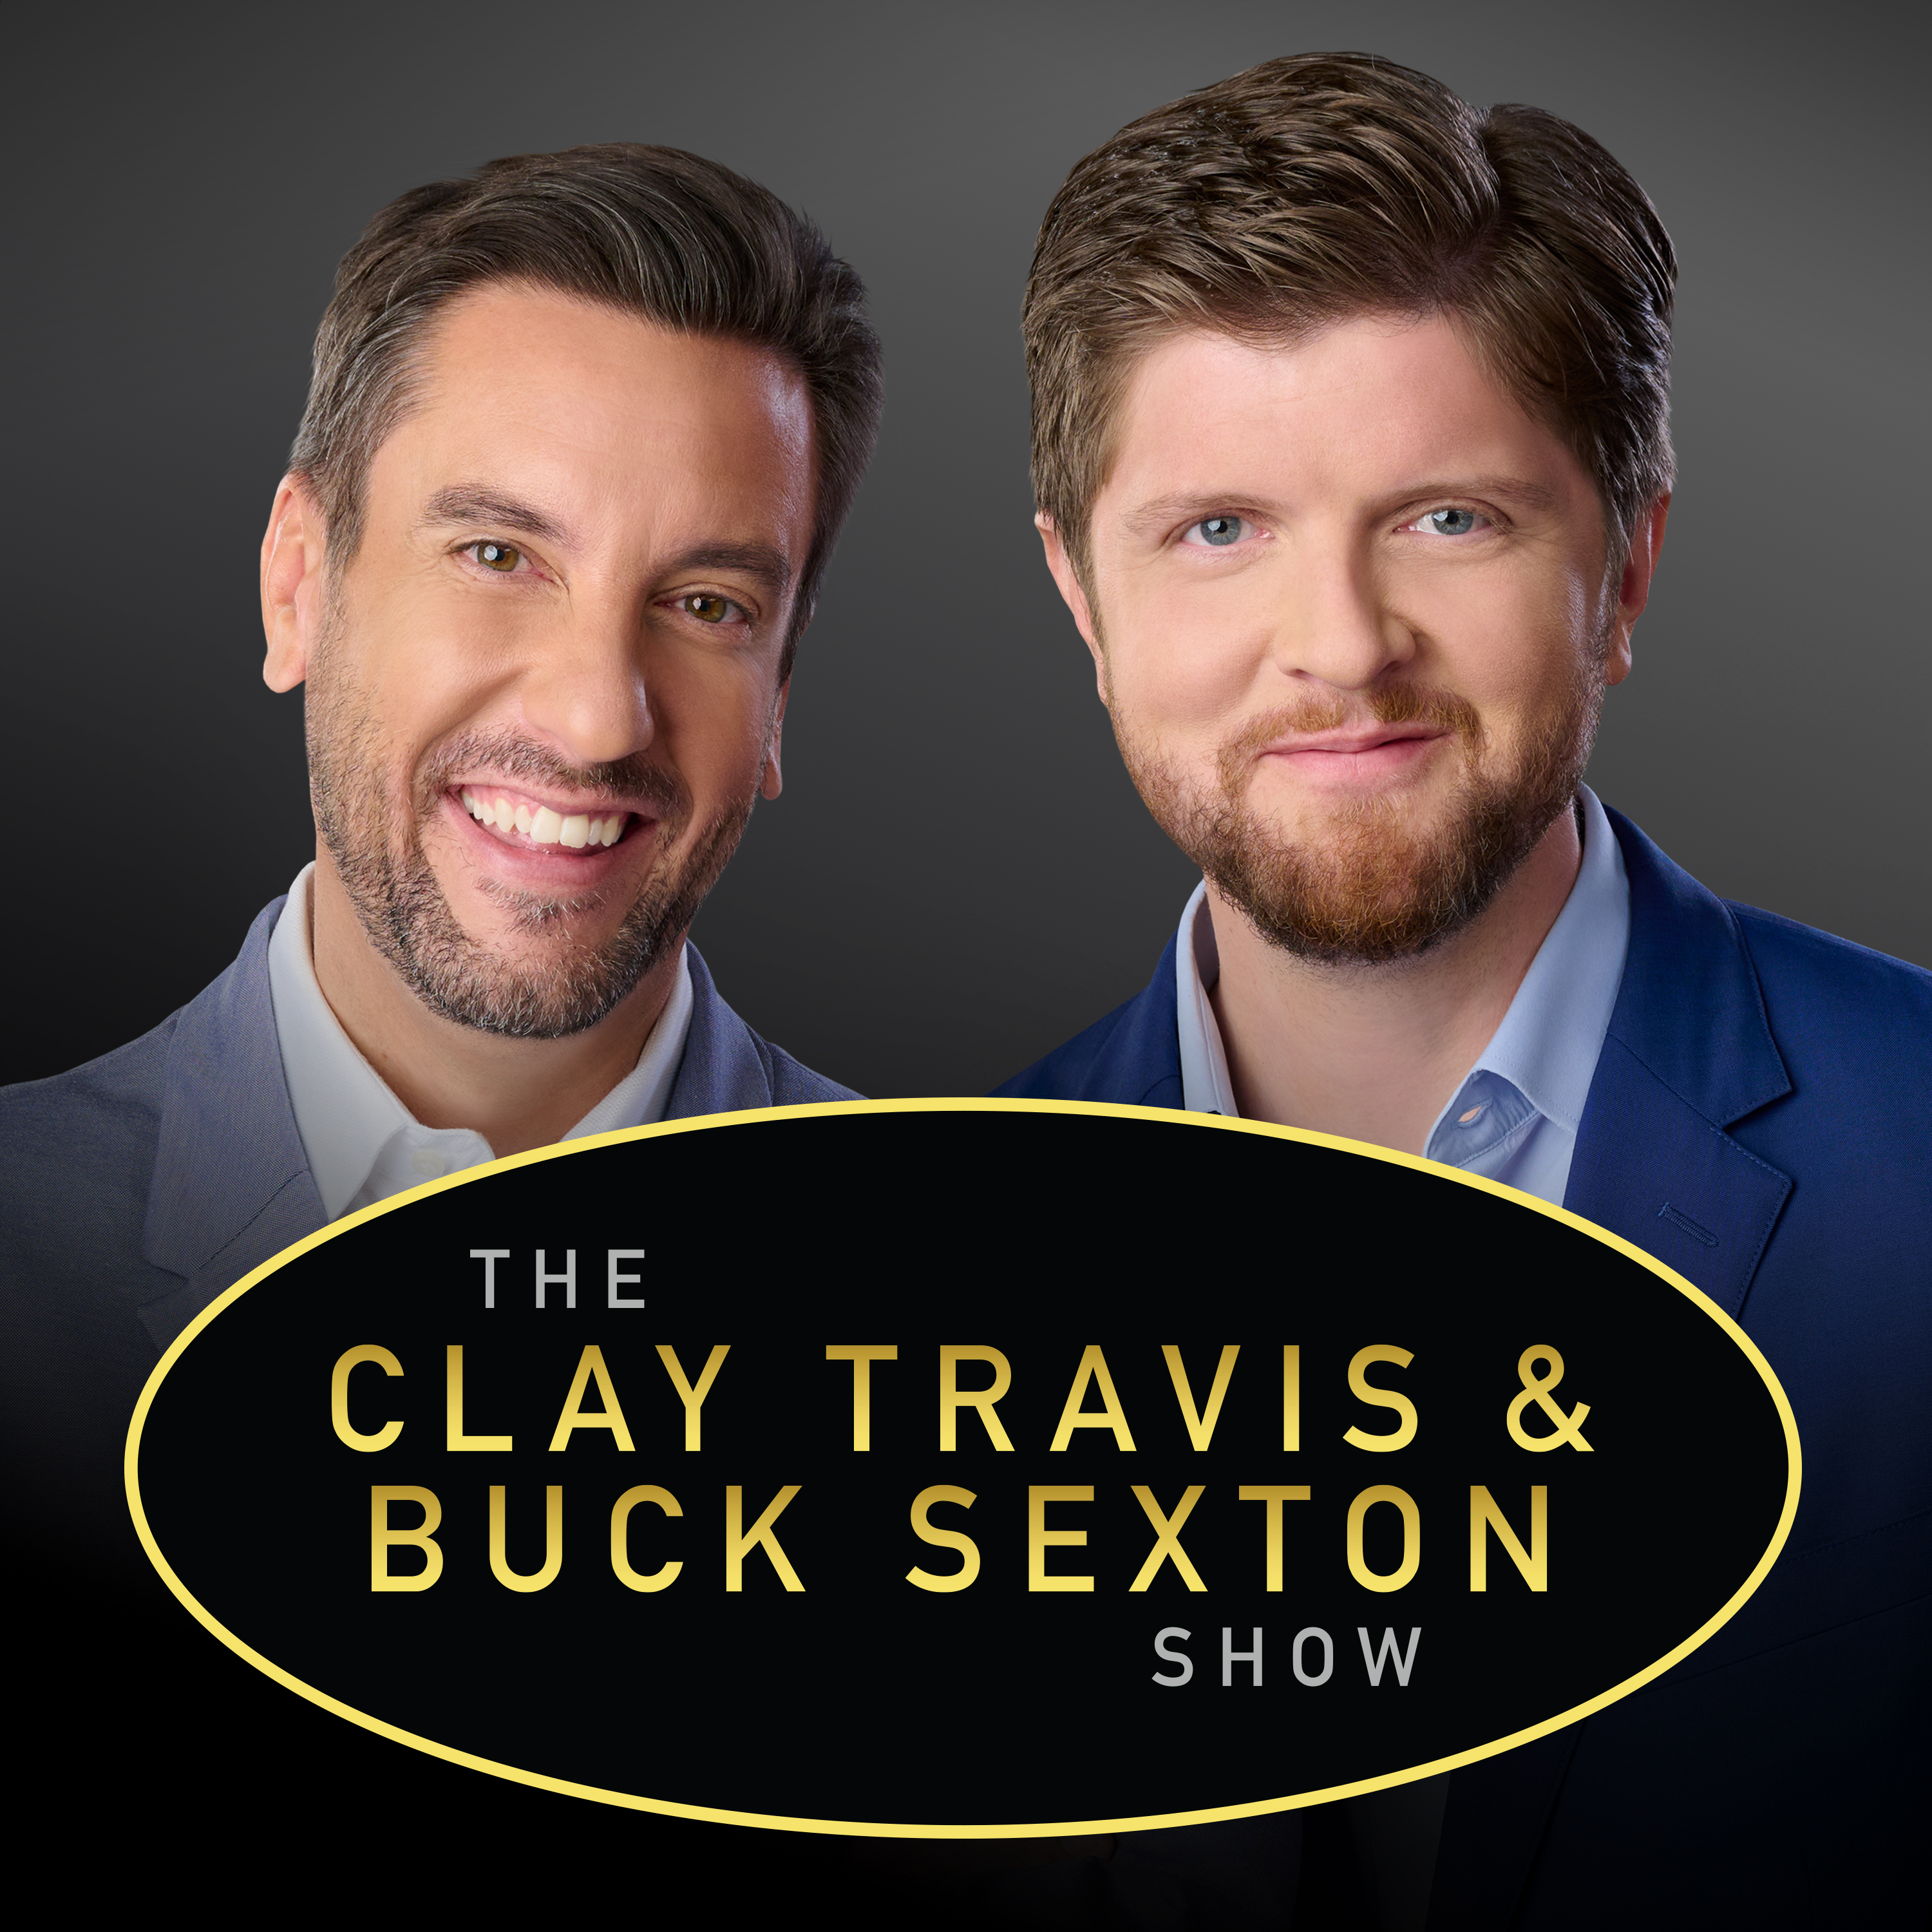 Clay Travis and Buck Sexton Show H1 – Sep 27 2022